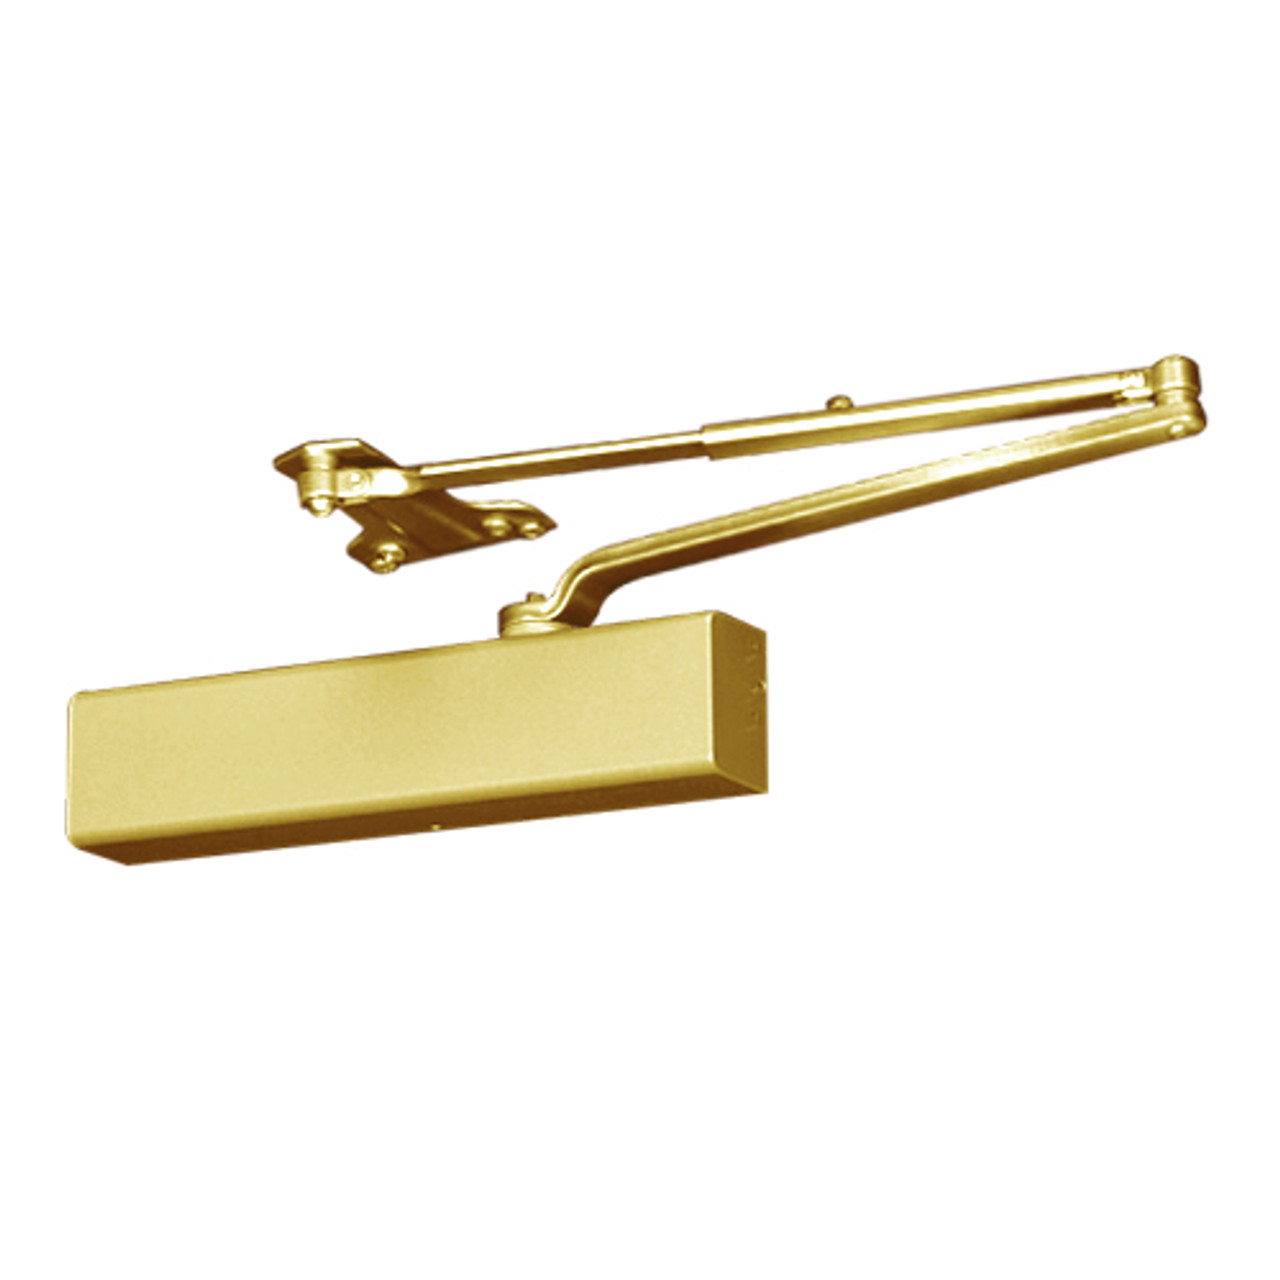 P8501M-696 Norton 8000 Series Full Cover Non-Hold Open Door Closers with Parallel Arm Application in Gold Finish